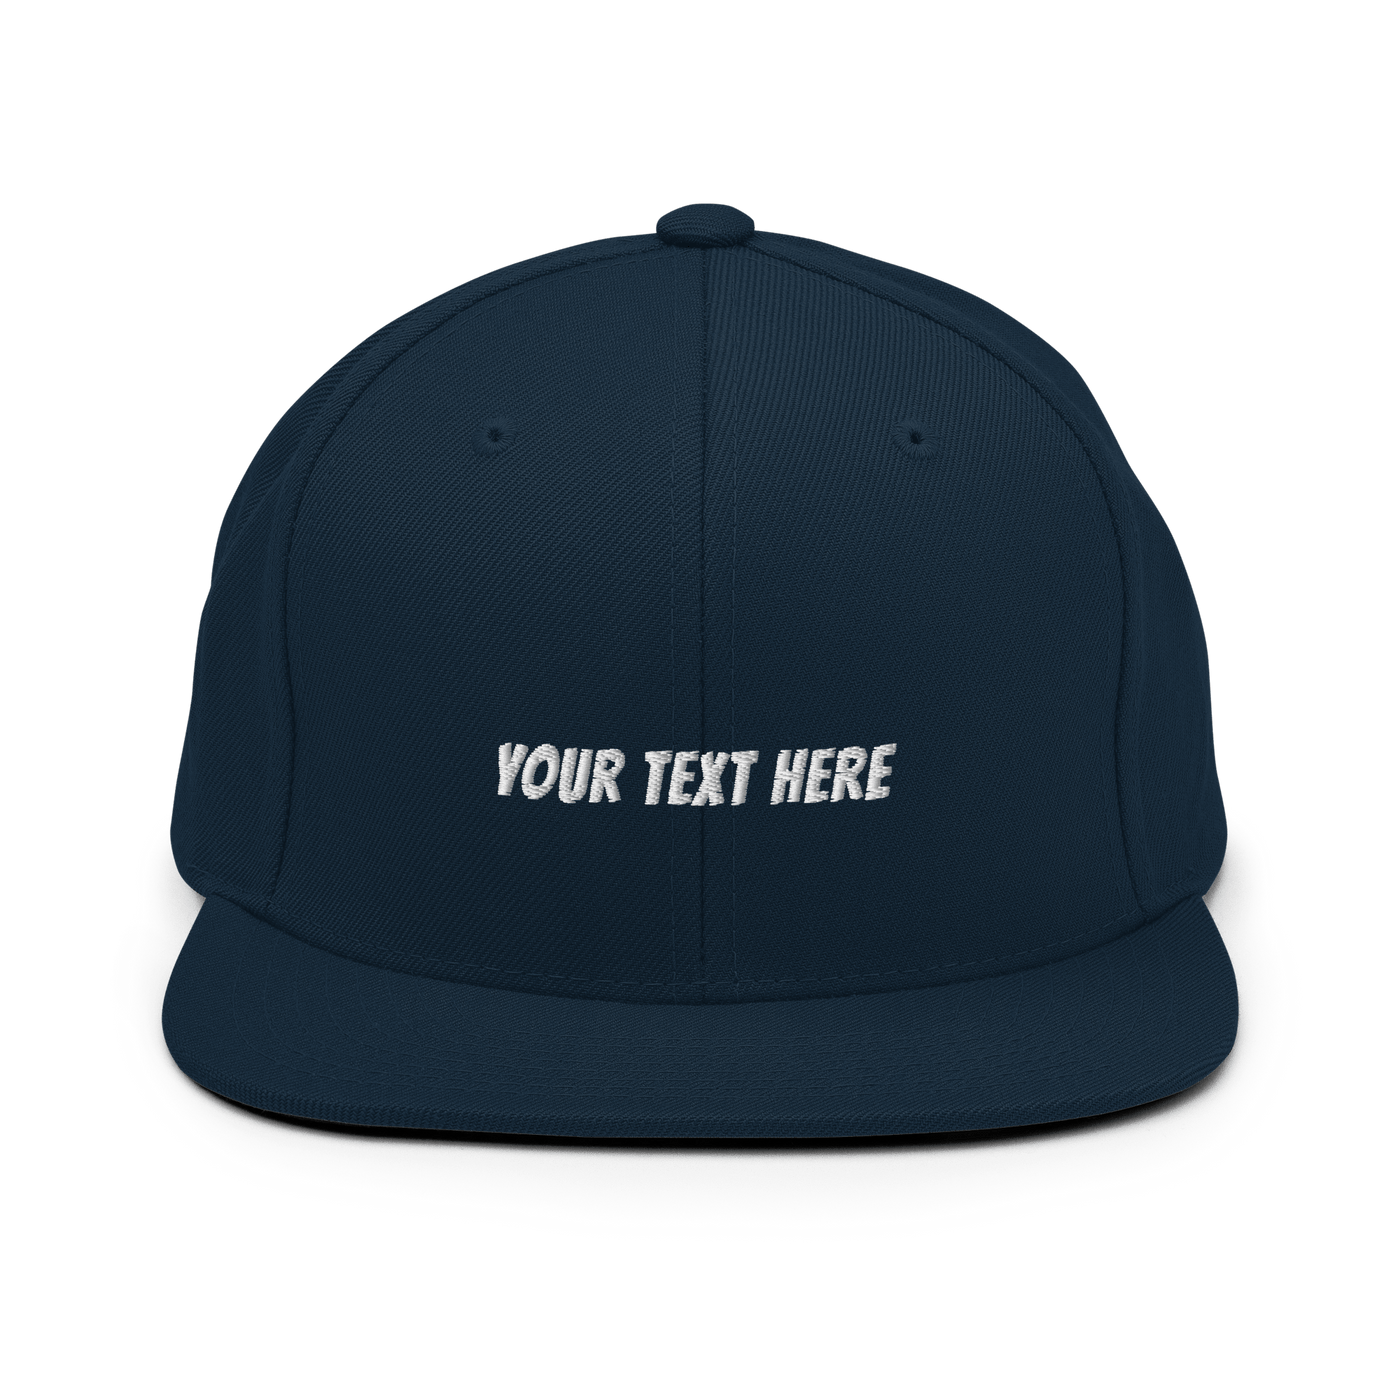 Customize Your Own Snapback Hat - Banger Font - Dark Navy - - Just Another Cap Store